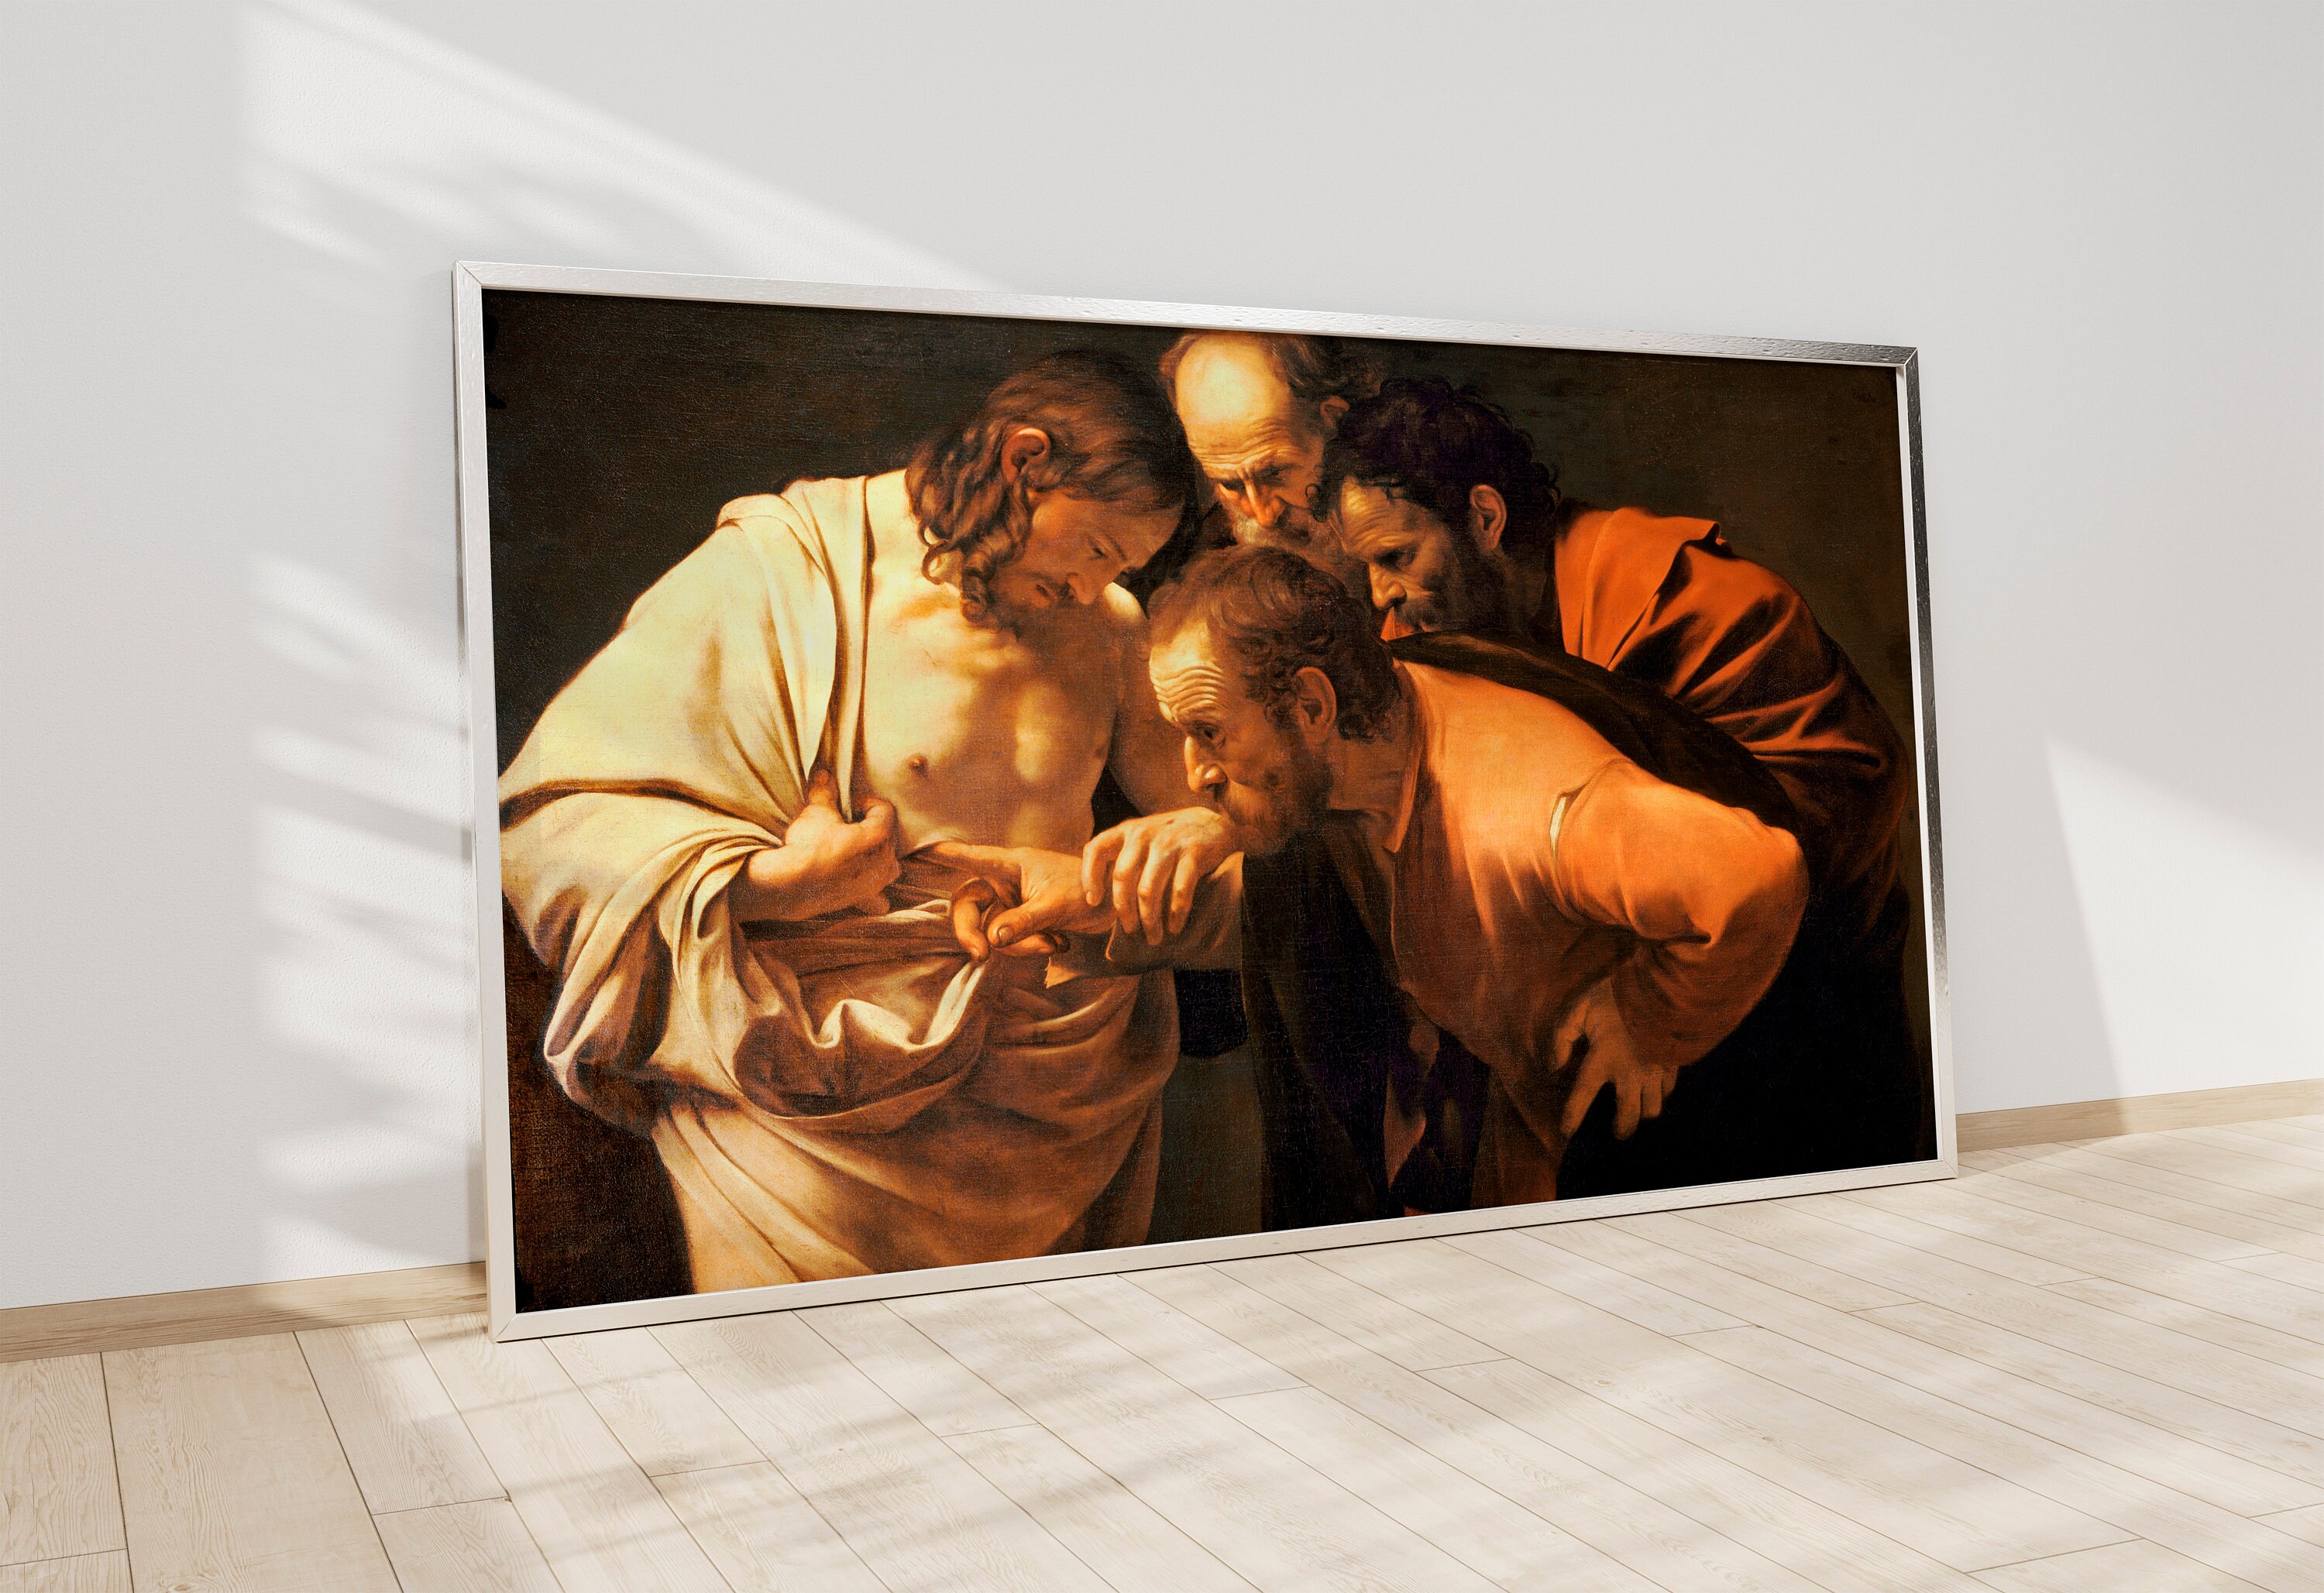 7. "The Incredulity of Saint Thomas" by Caravaggio - wide 7